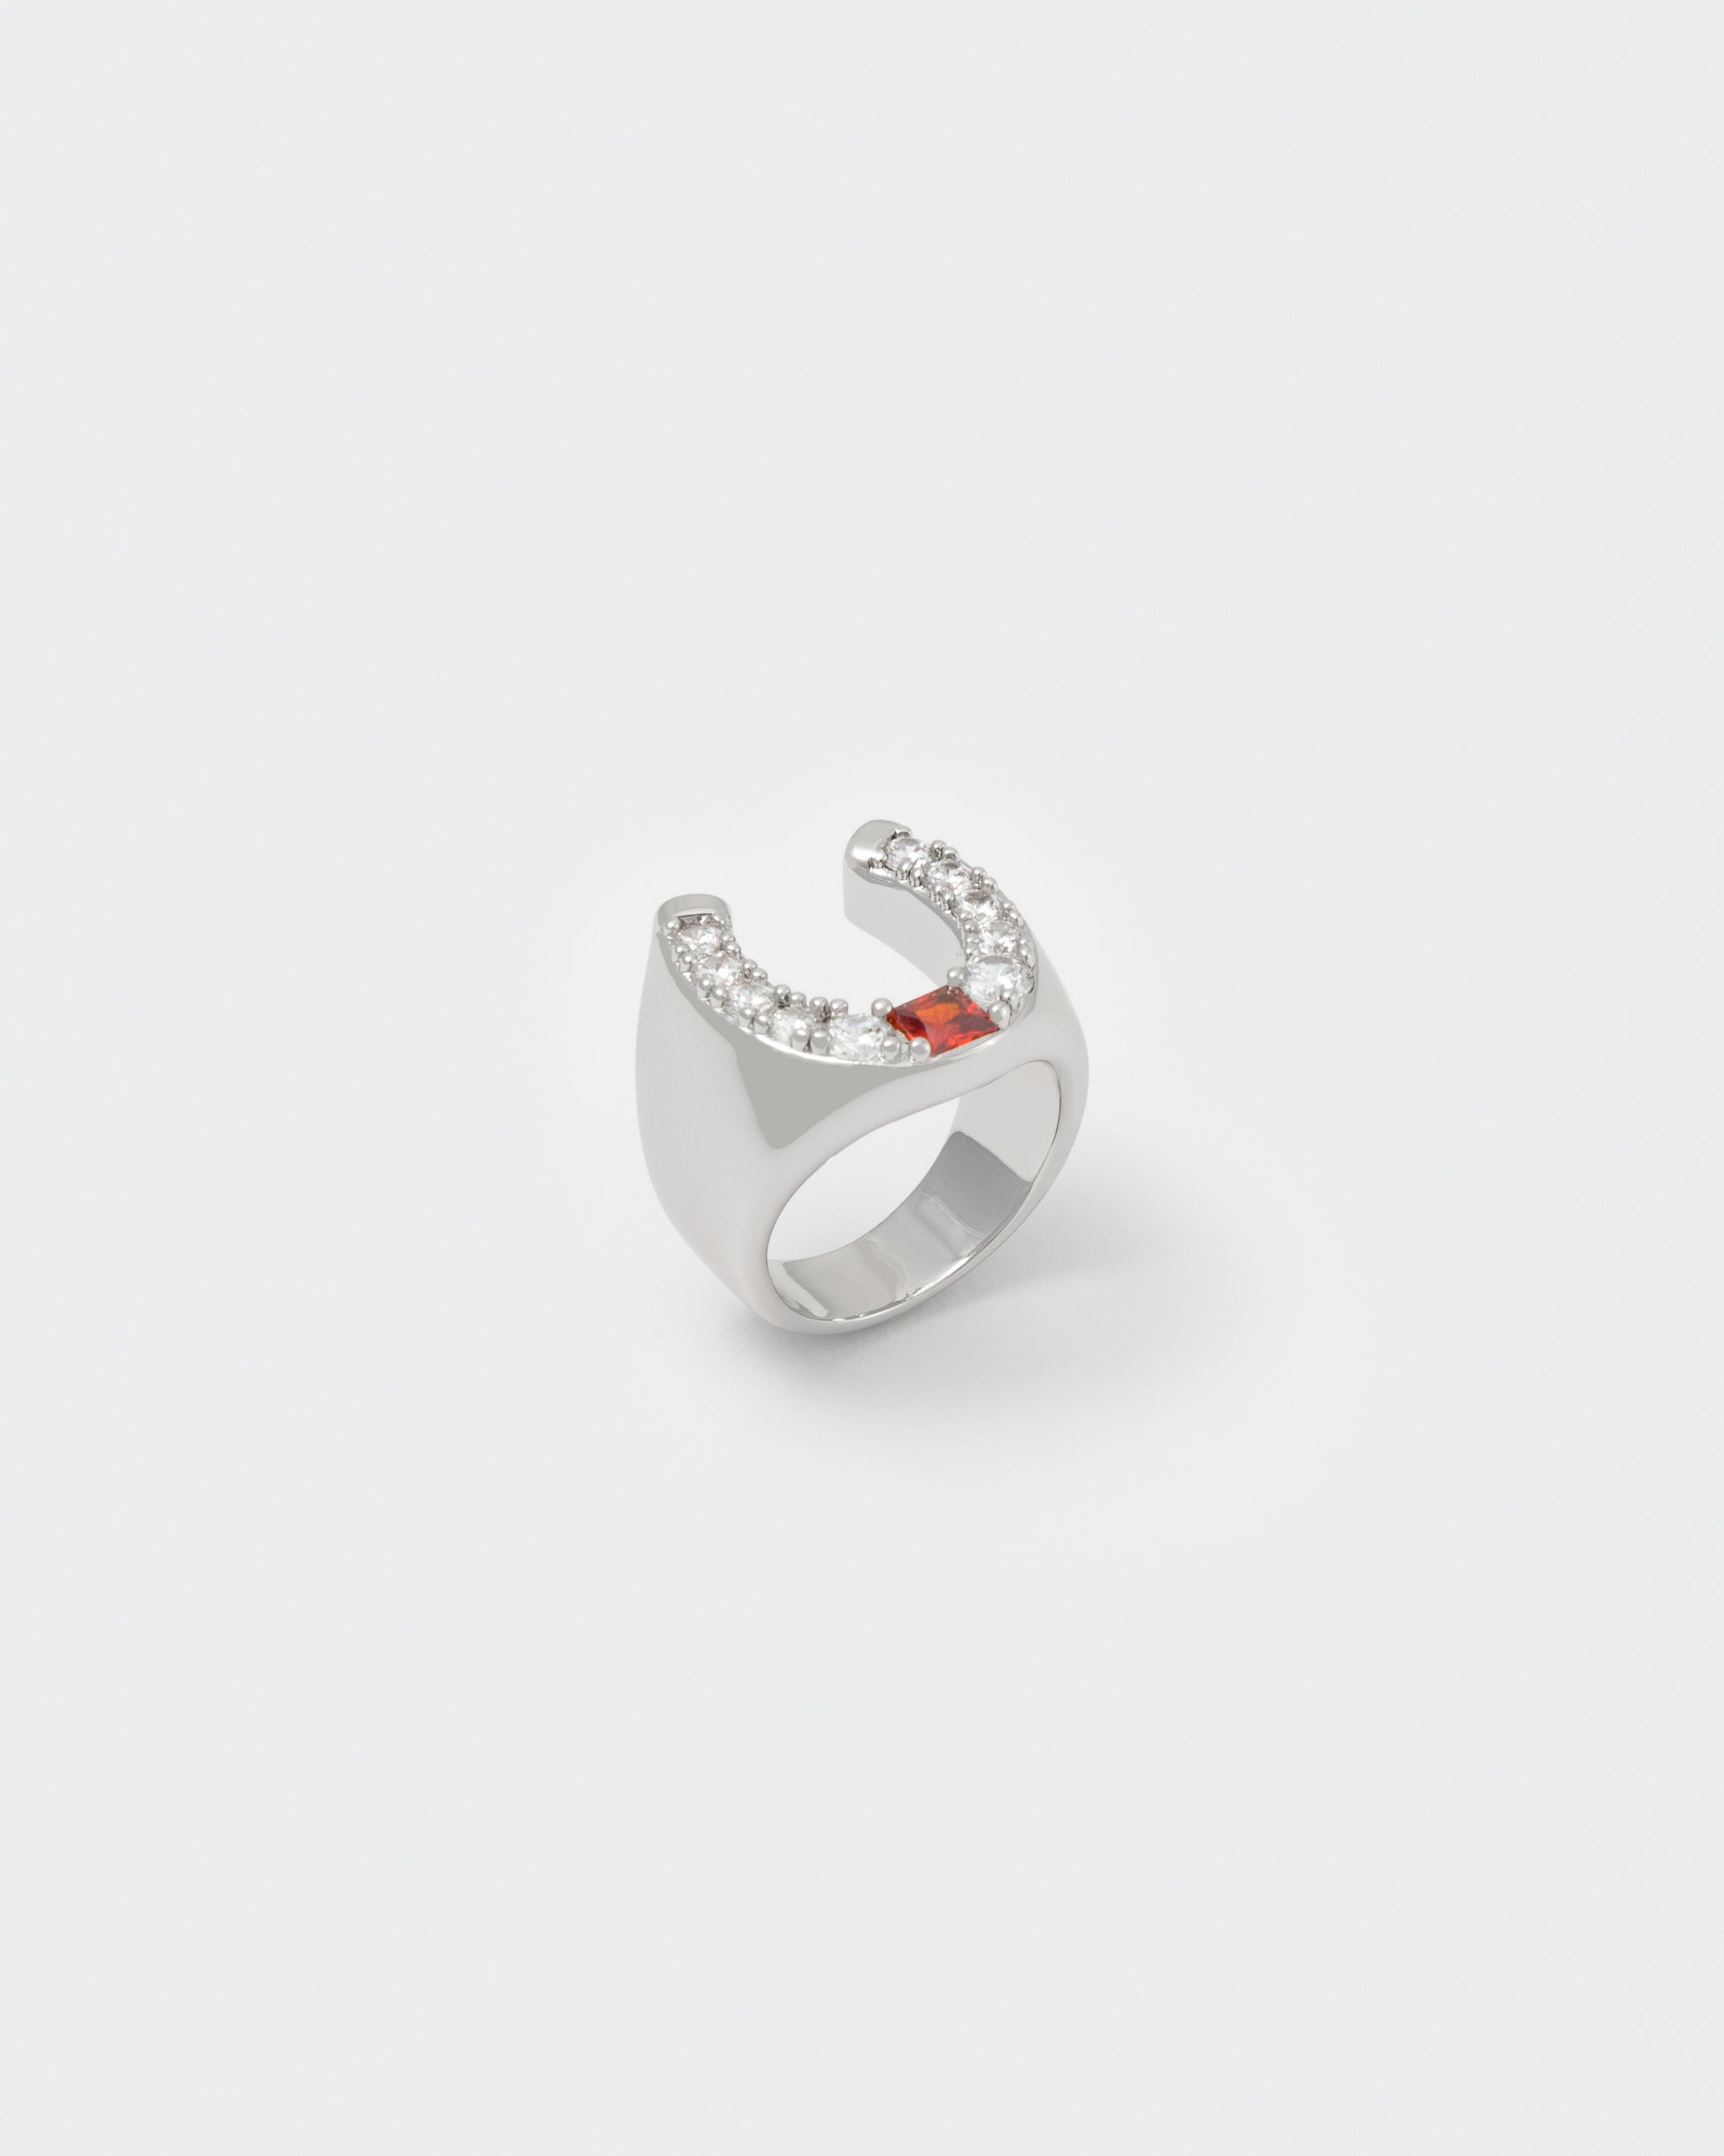 horseshoe ring with 18kt white gold coating and round shaped brilliant-cut diamond white stones with central princess-cut garnet stone